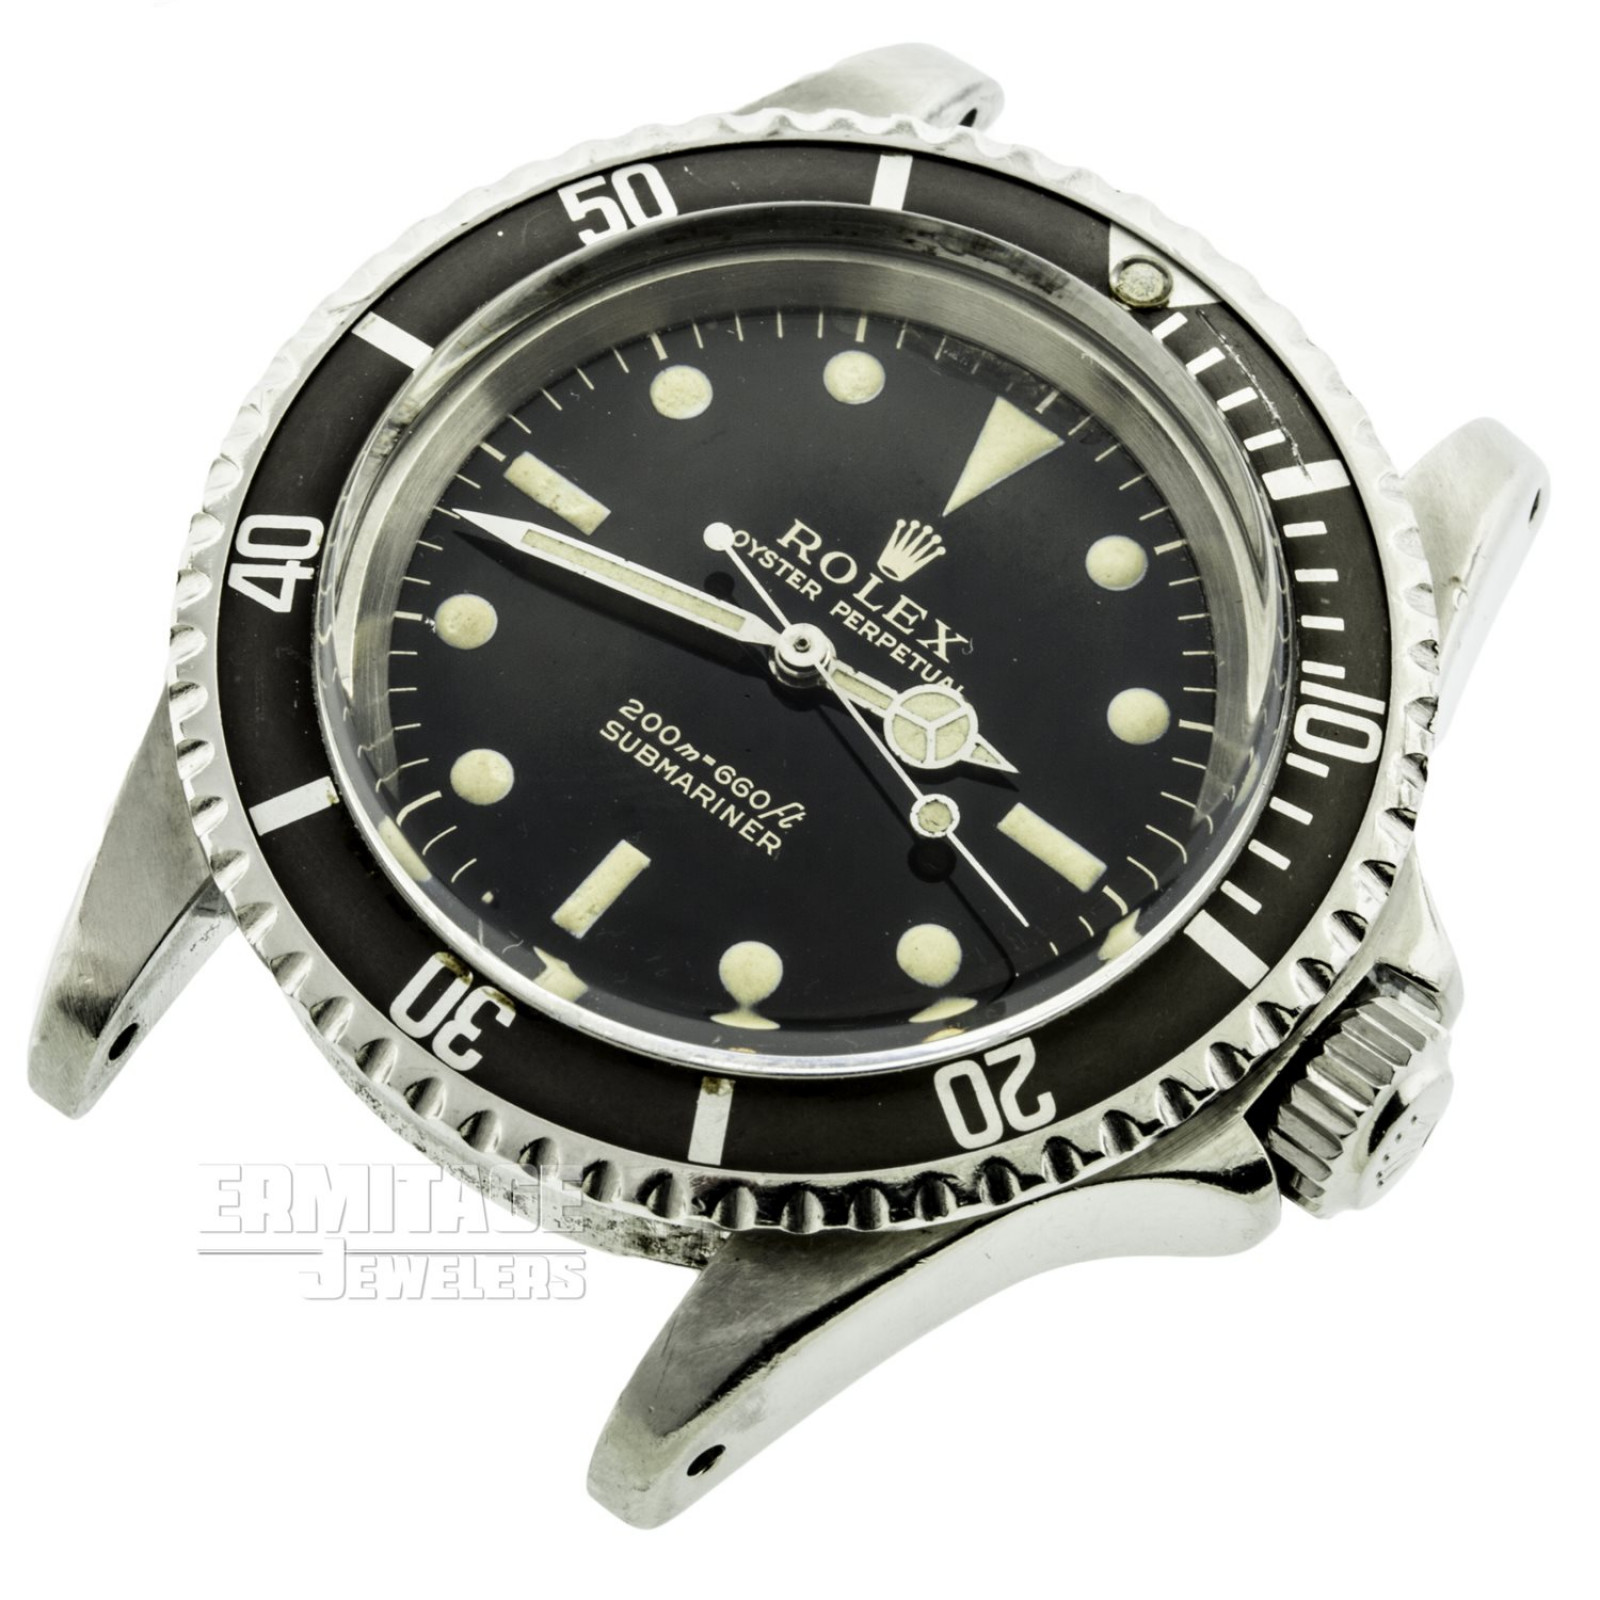 Rolex Submariner 5513 with Gilt Dial 40 mm